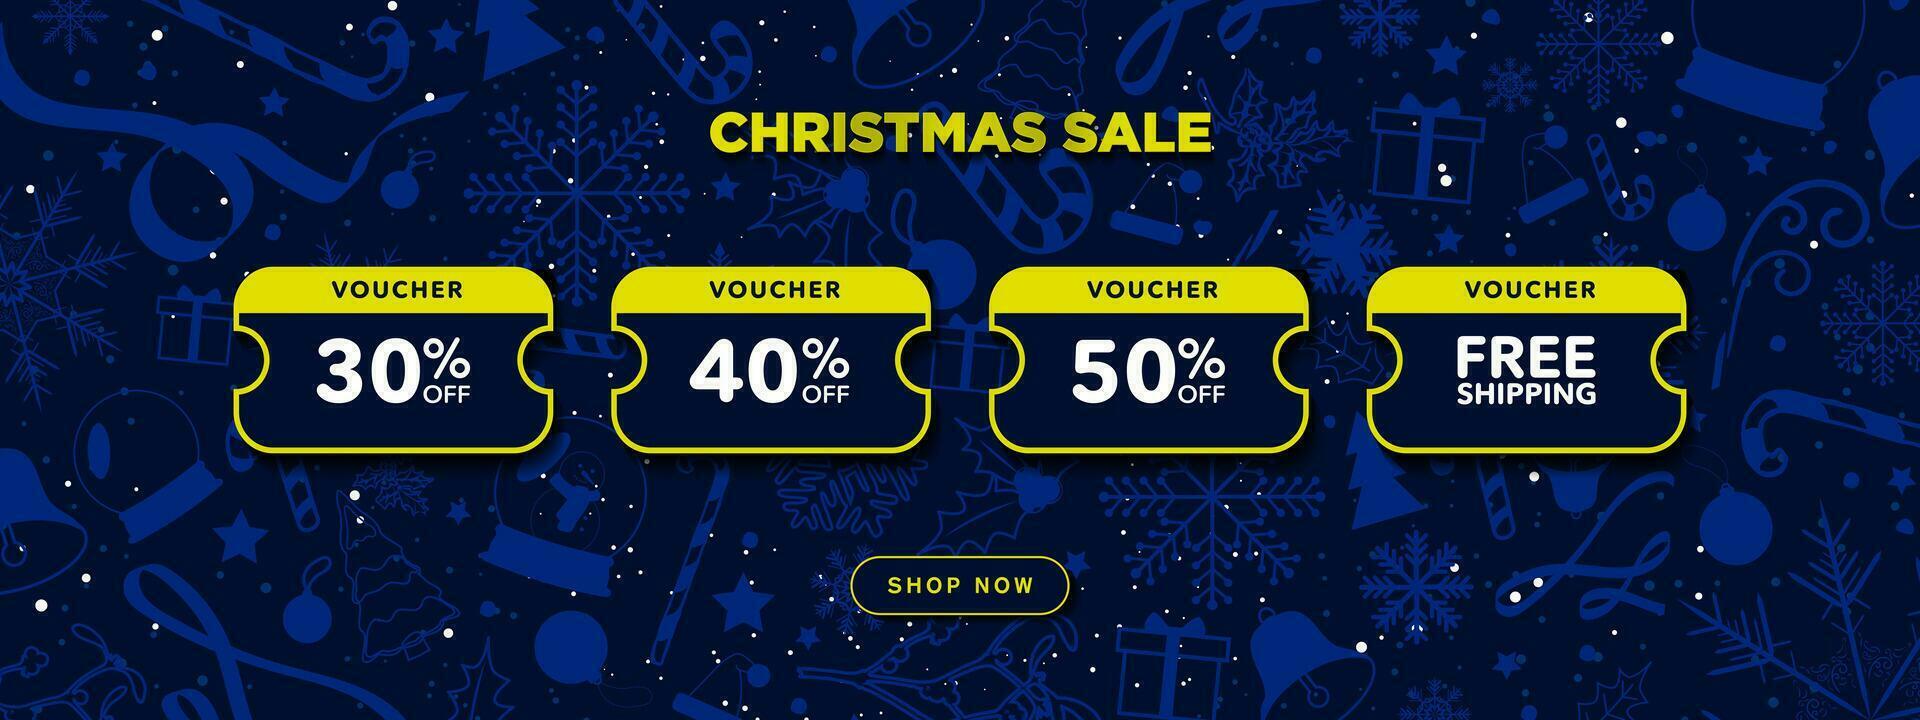 Online Christmas Voucher Coupons on teal blue banner with Christmas patterns and designs. 50 and Free delivery discount coupons with shop now CTA button. Merry Christmas. Vector Illustration